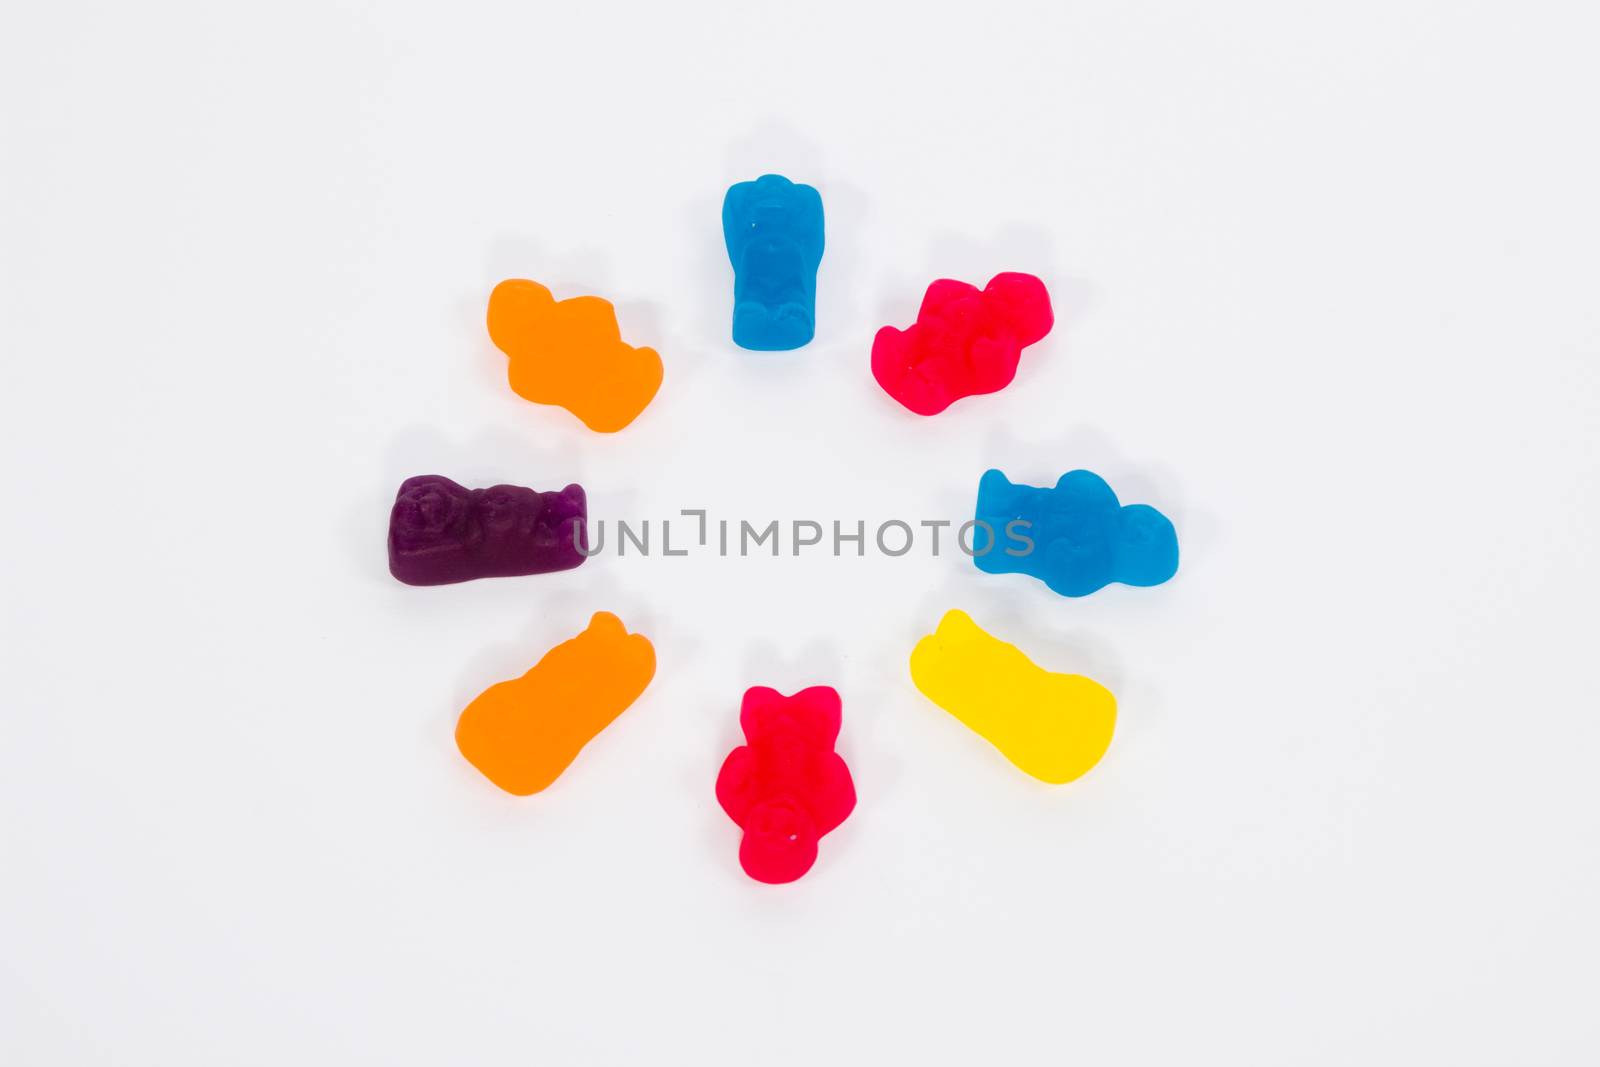 A group of jelly baby athletes performing synchronized swimming.